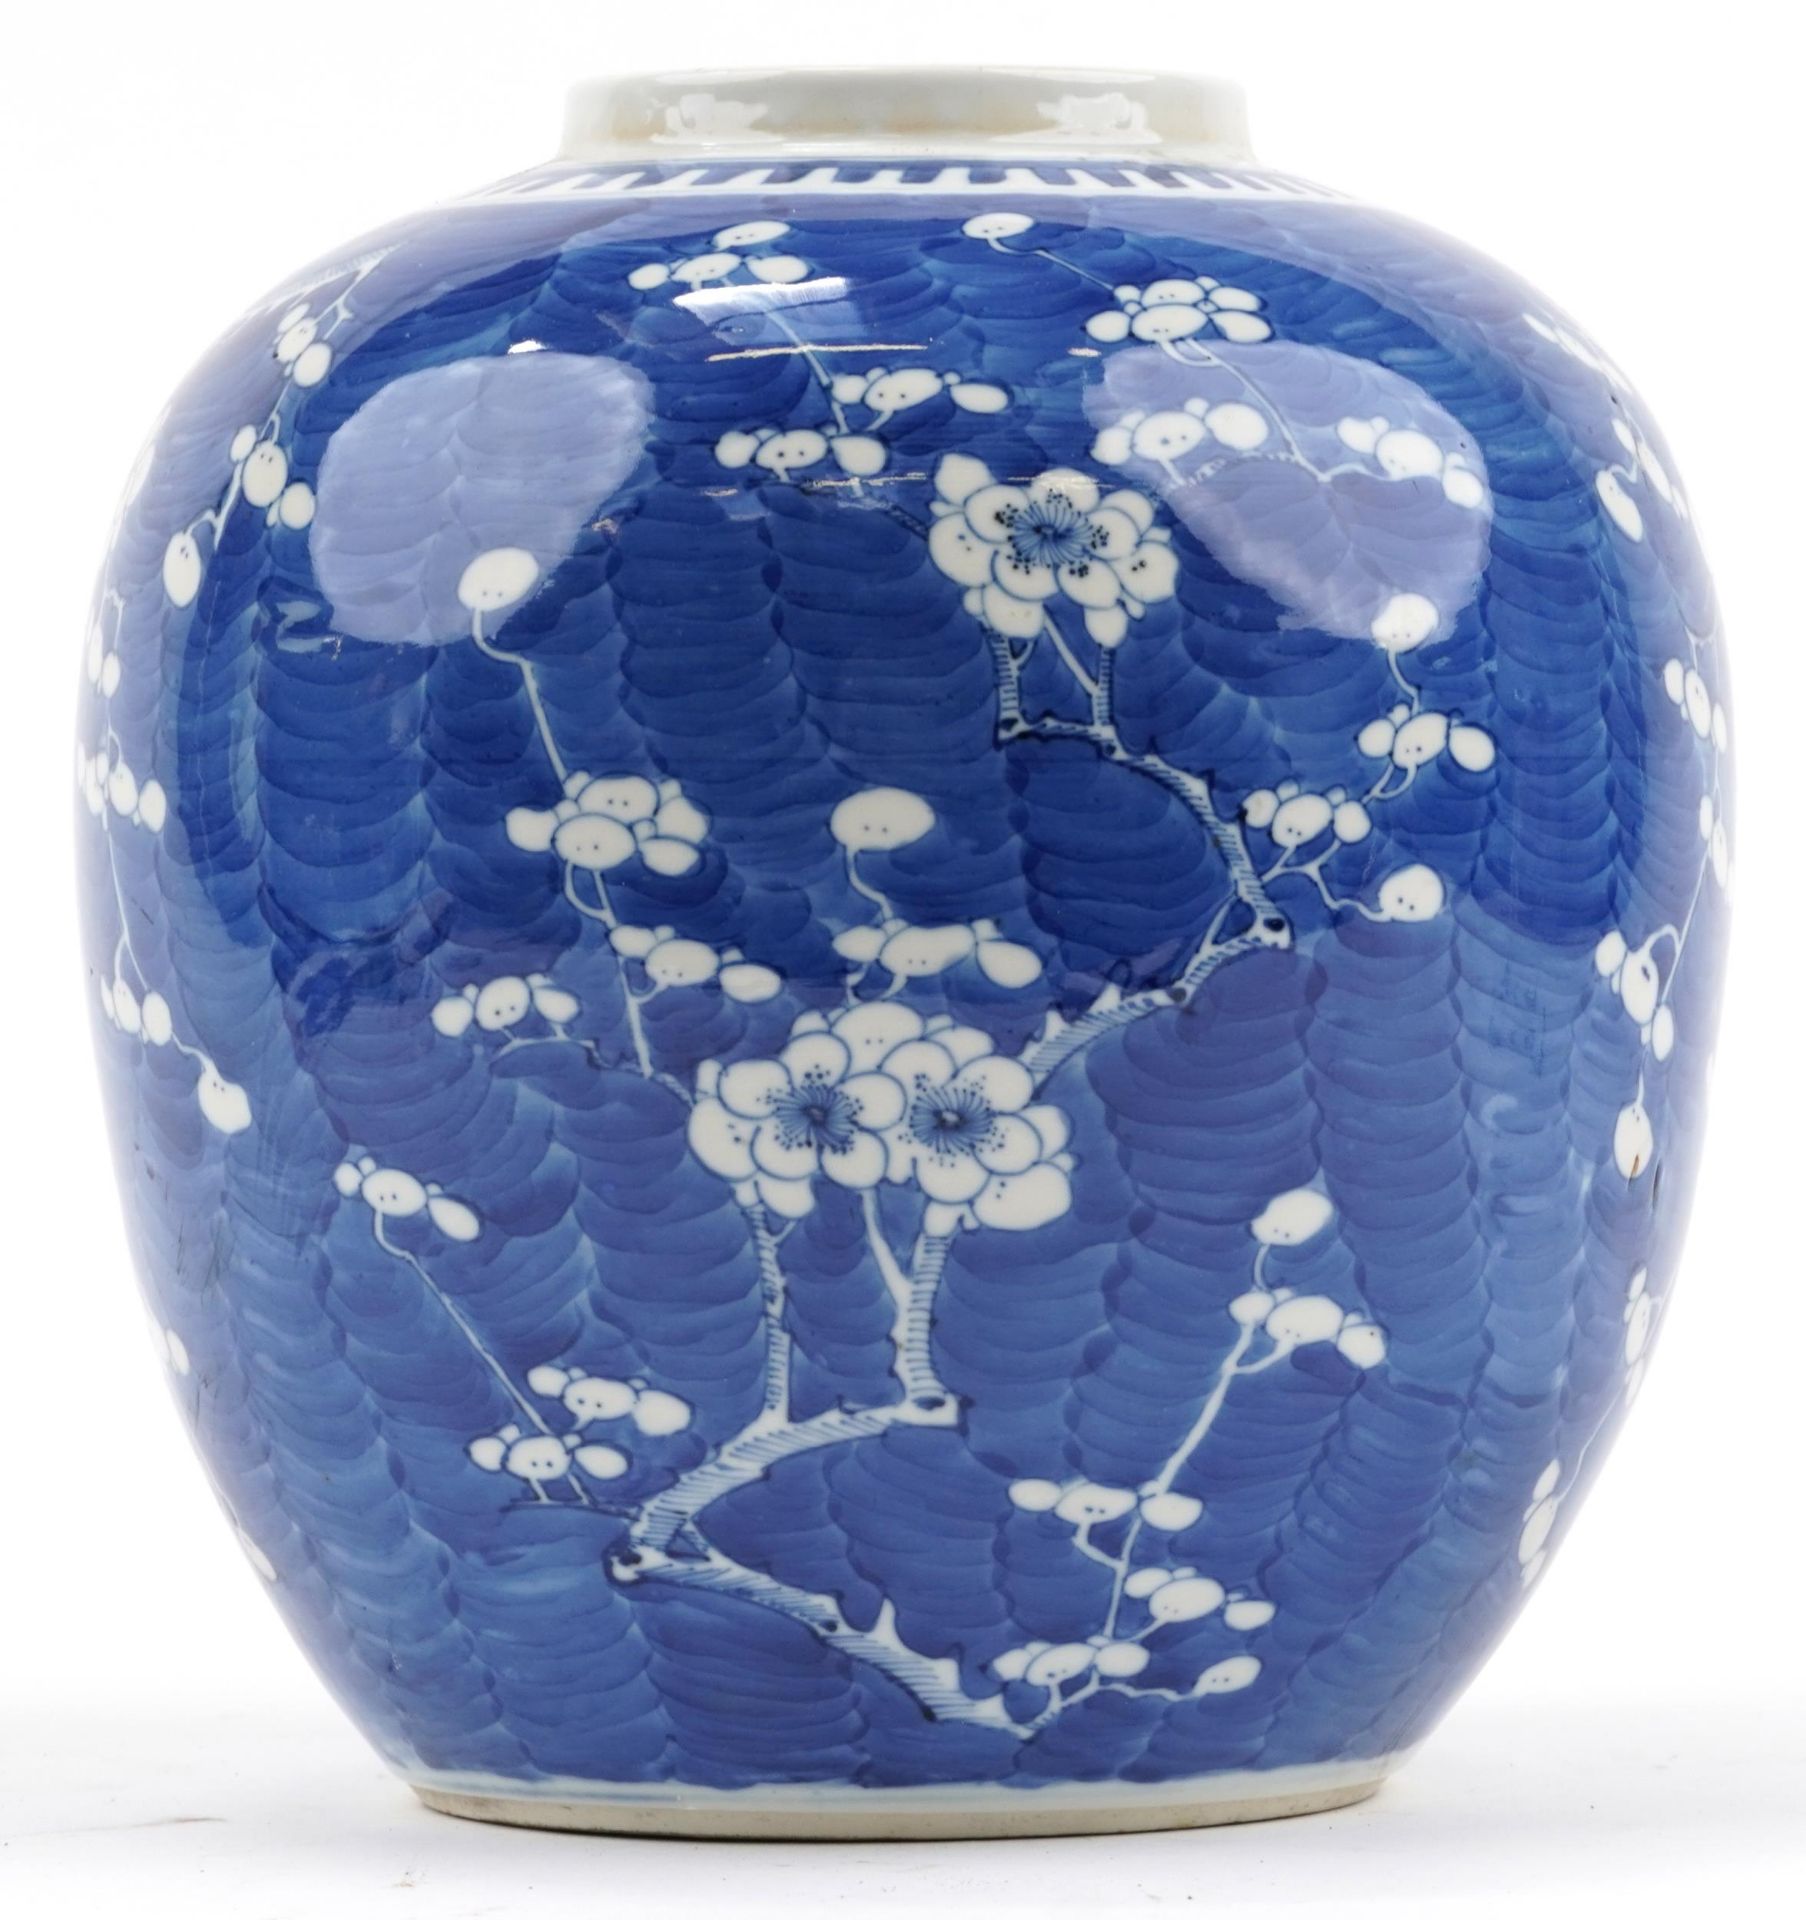 Unusually large Chinese blue and white porcelain ginger jar hand painted with prunus flowers, four